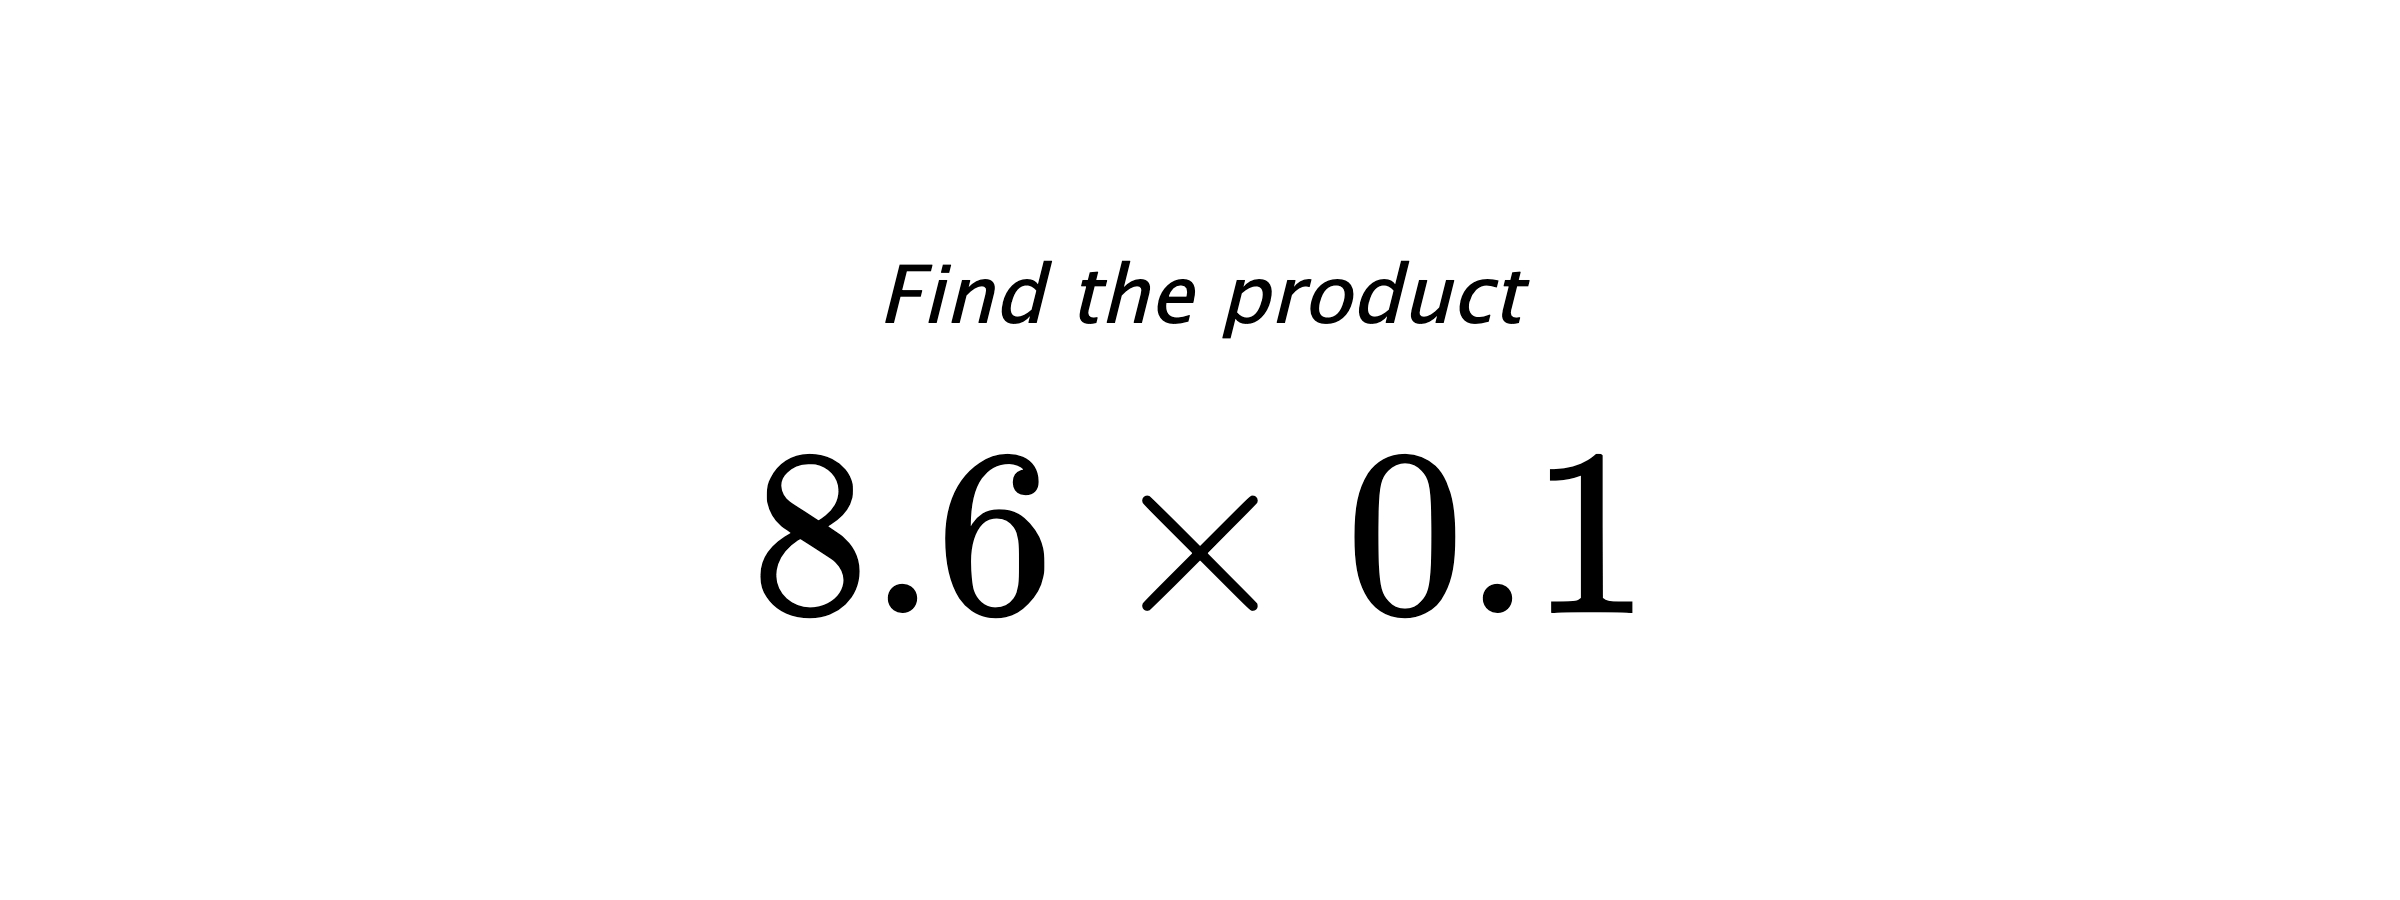 Find the product $ 8.6 \times 0.1 $